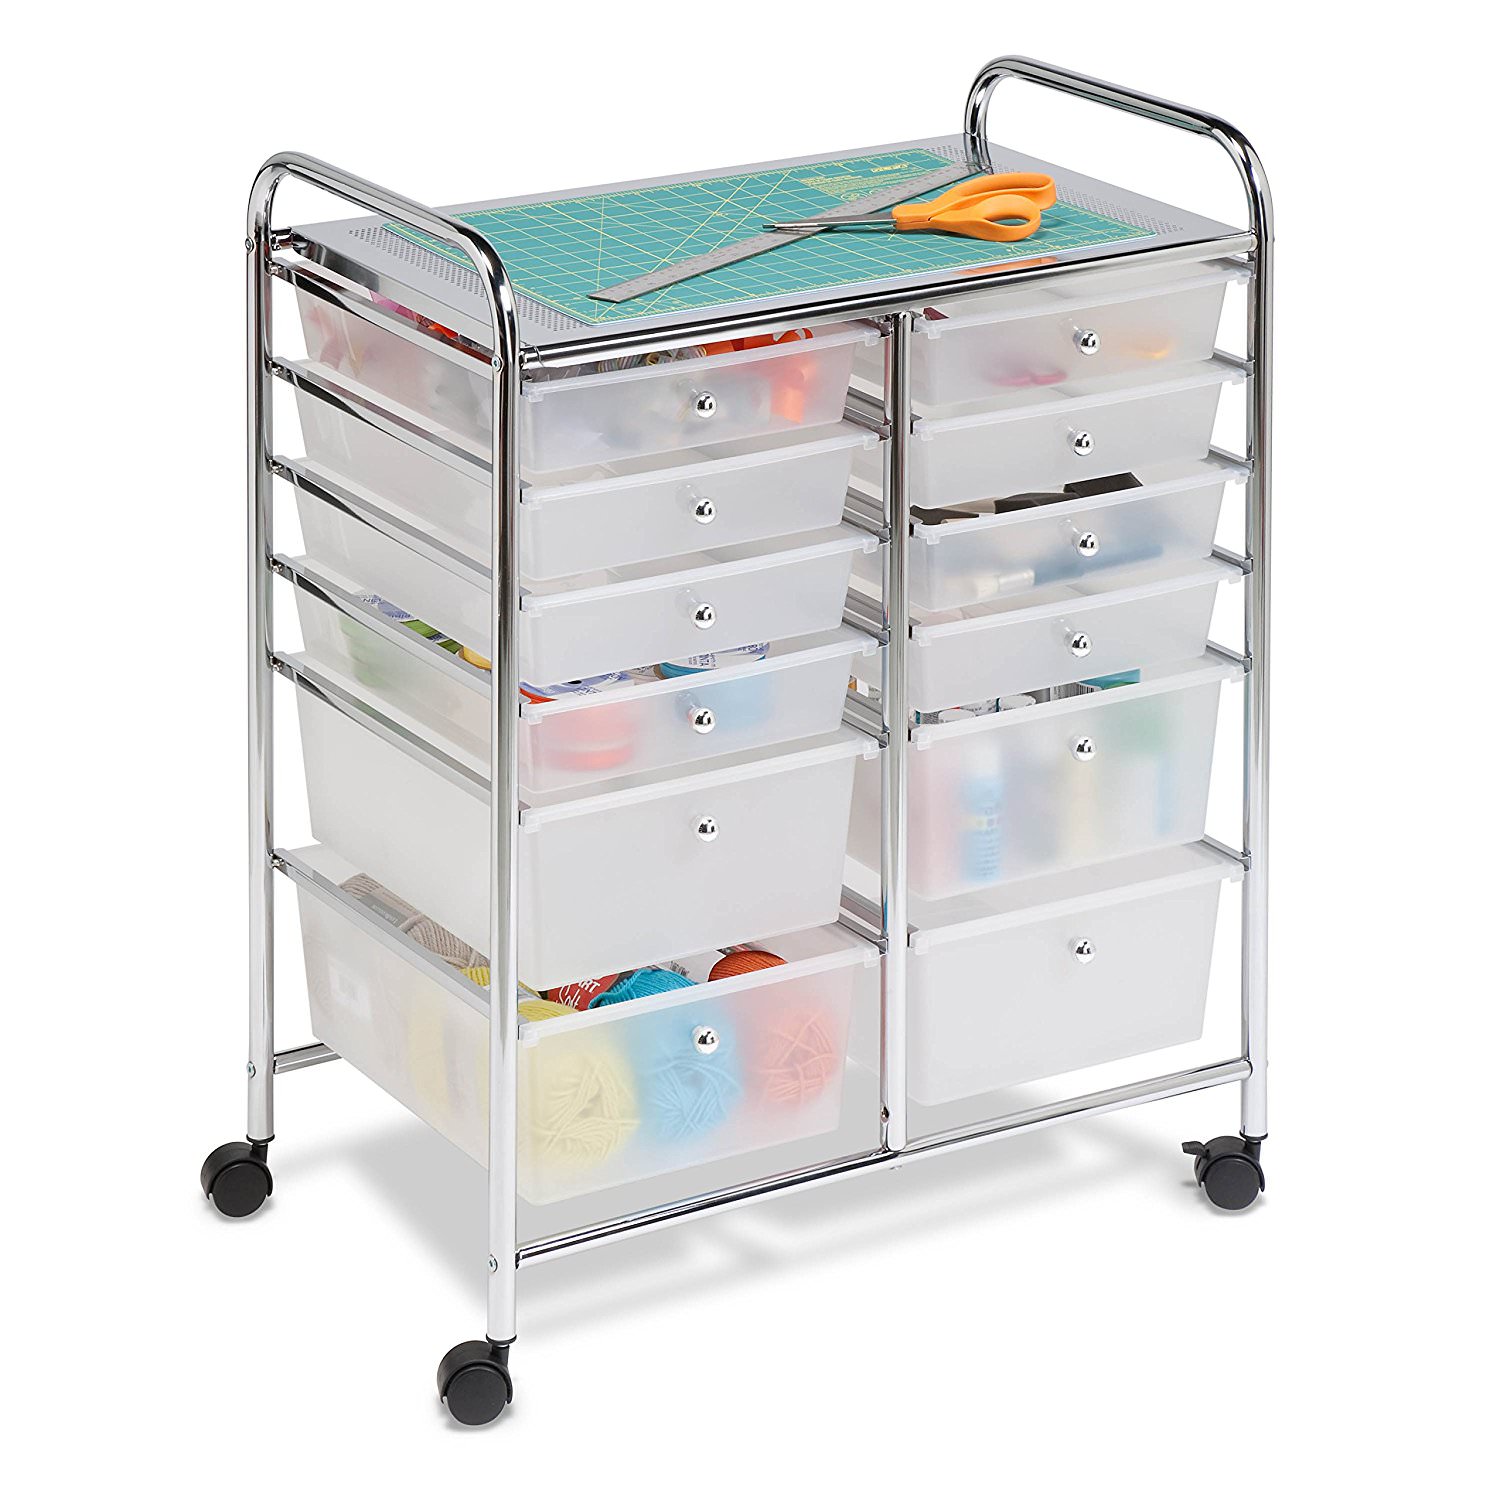 Honey-Can-Do 6 Tier Rolling 12 Plastic Drawer Storage Cart and Craft Organizer with Lockable Wheels, Clear/Chrome - image 8 of 9